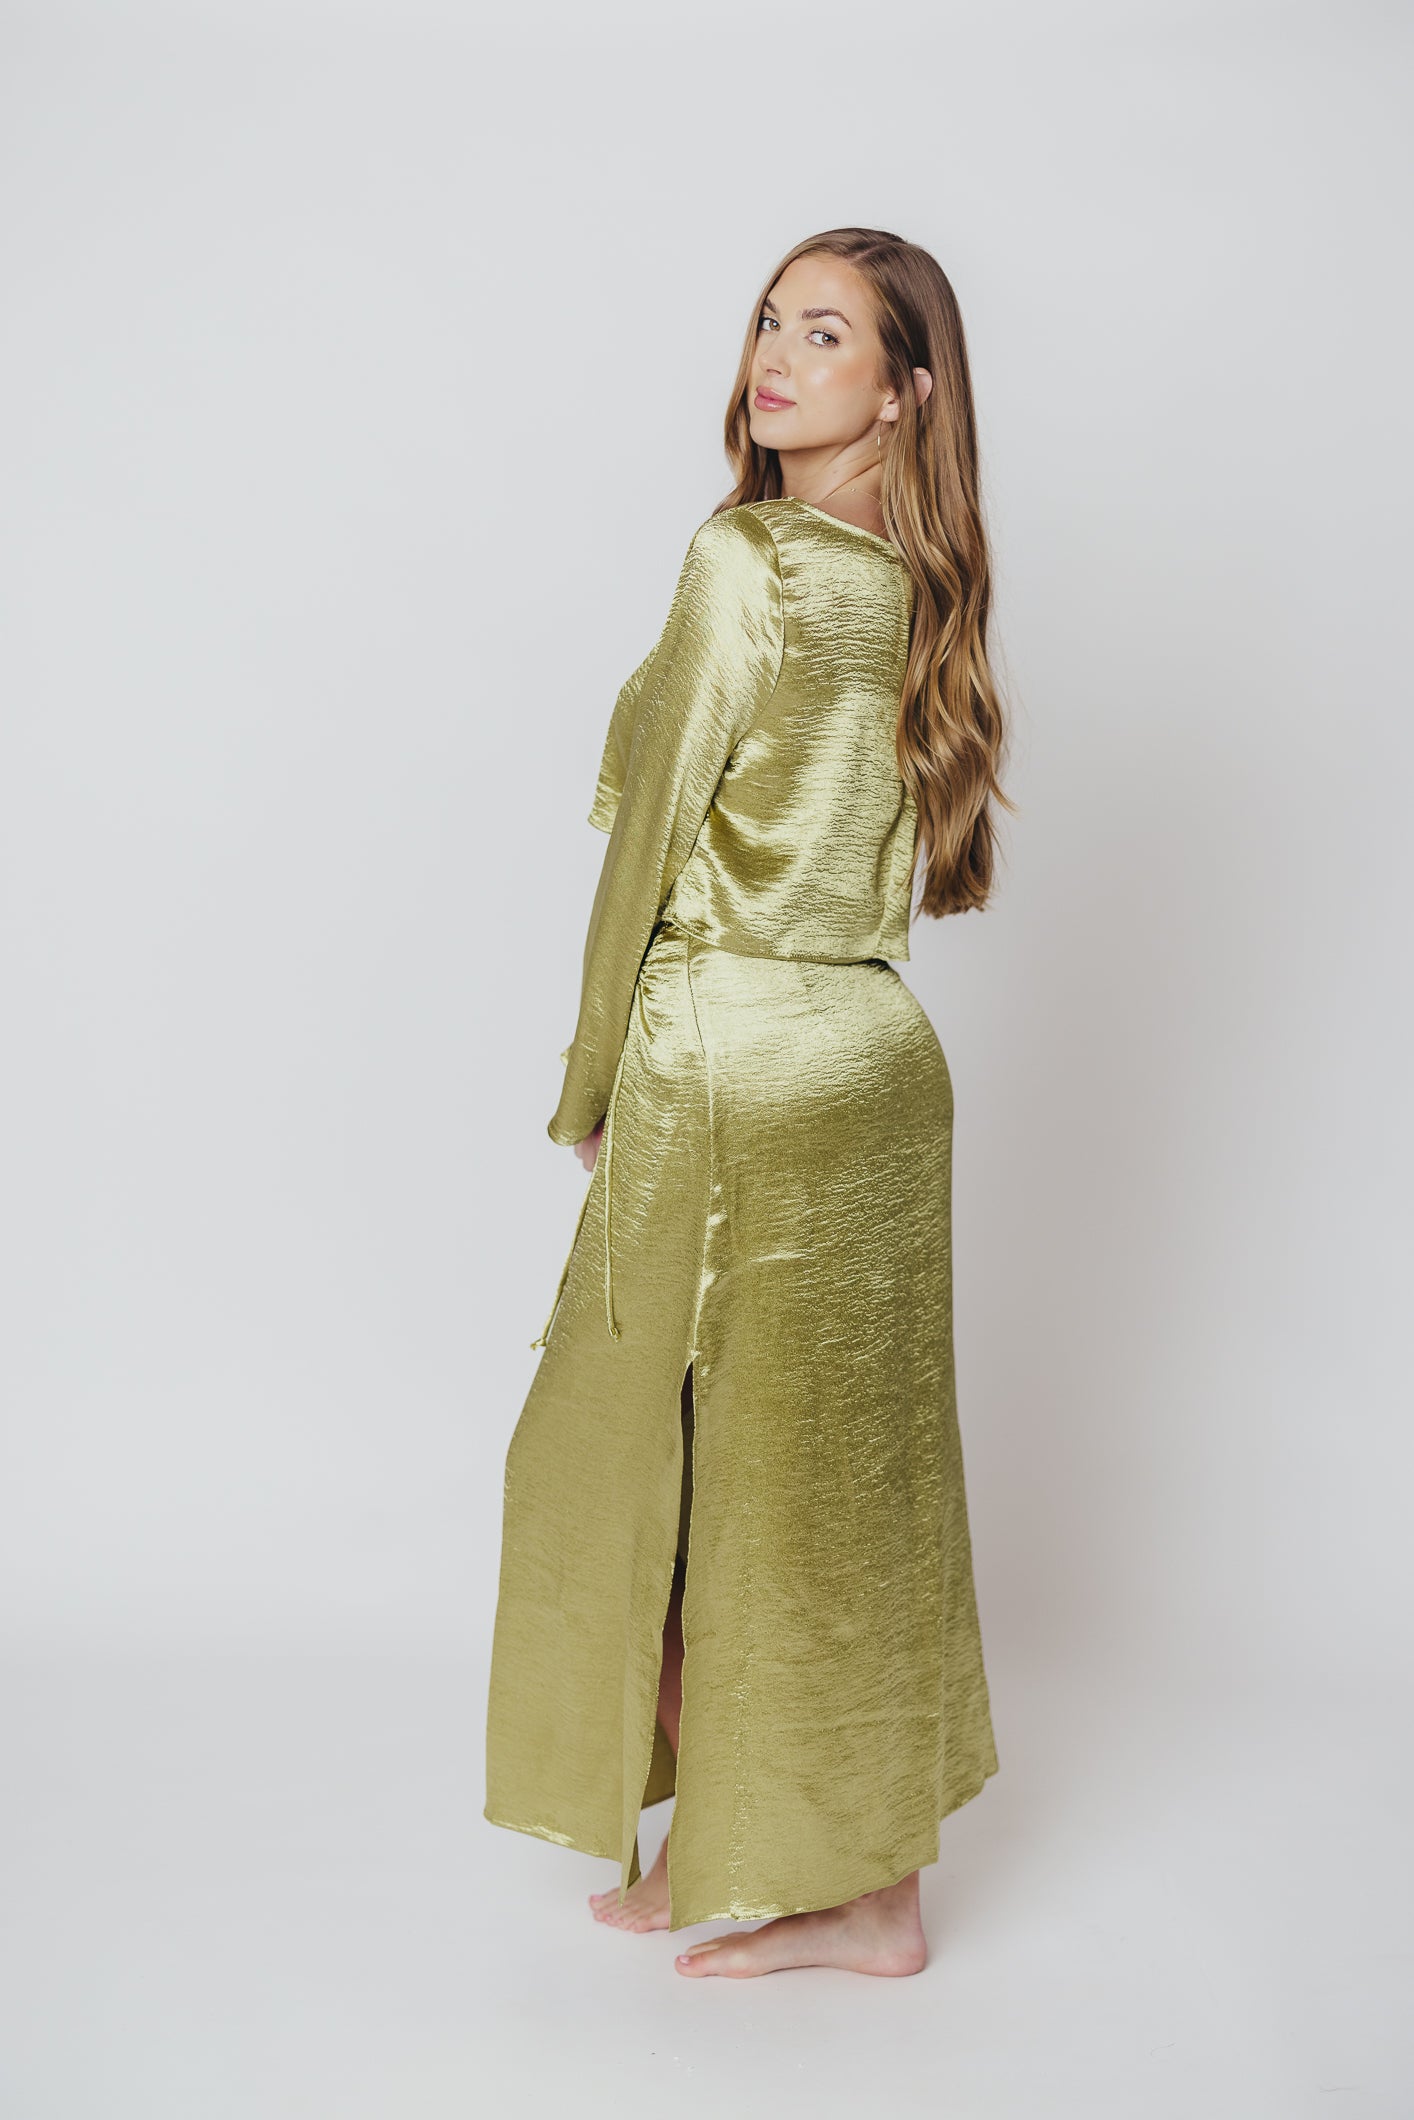 Cecily Top in Olive Gold